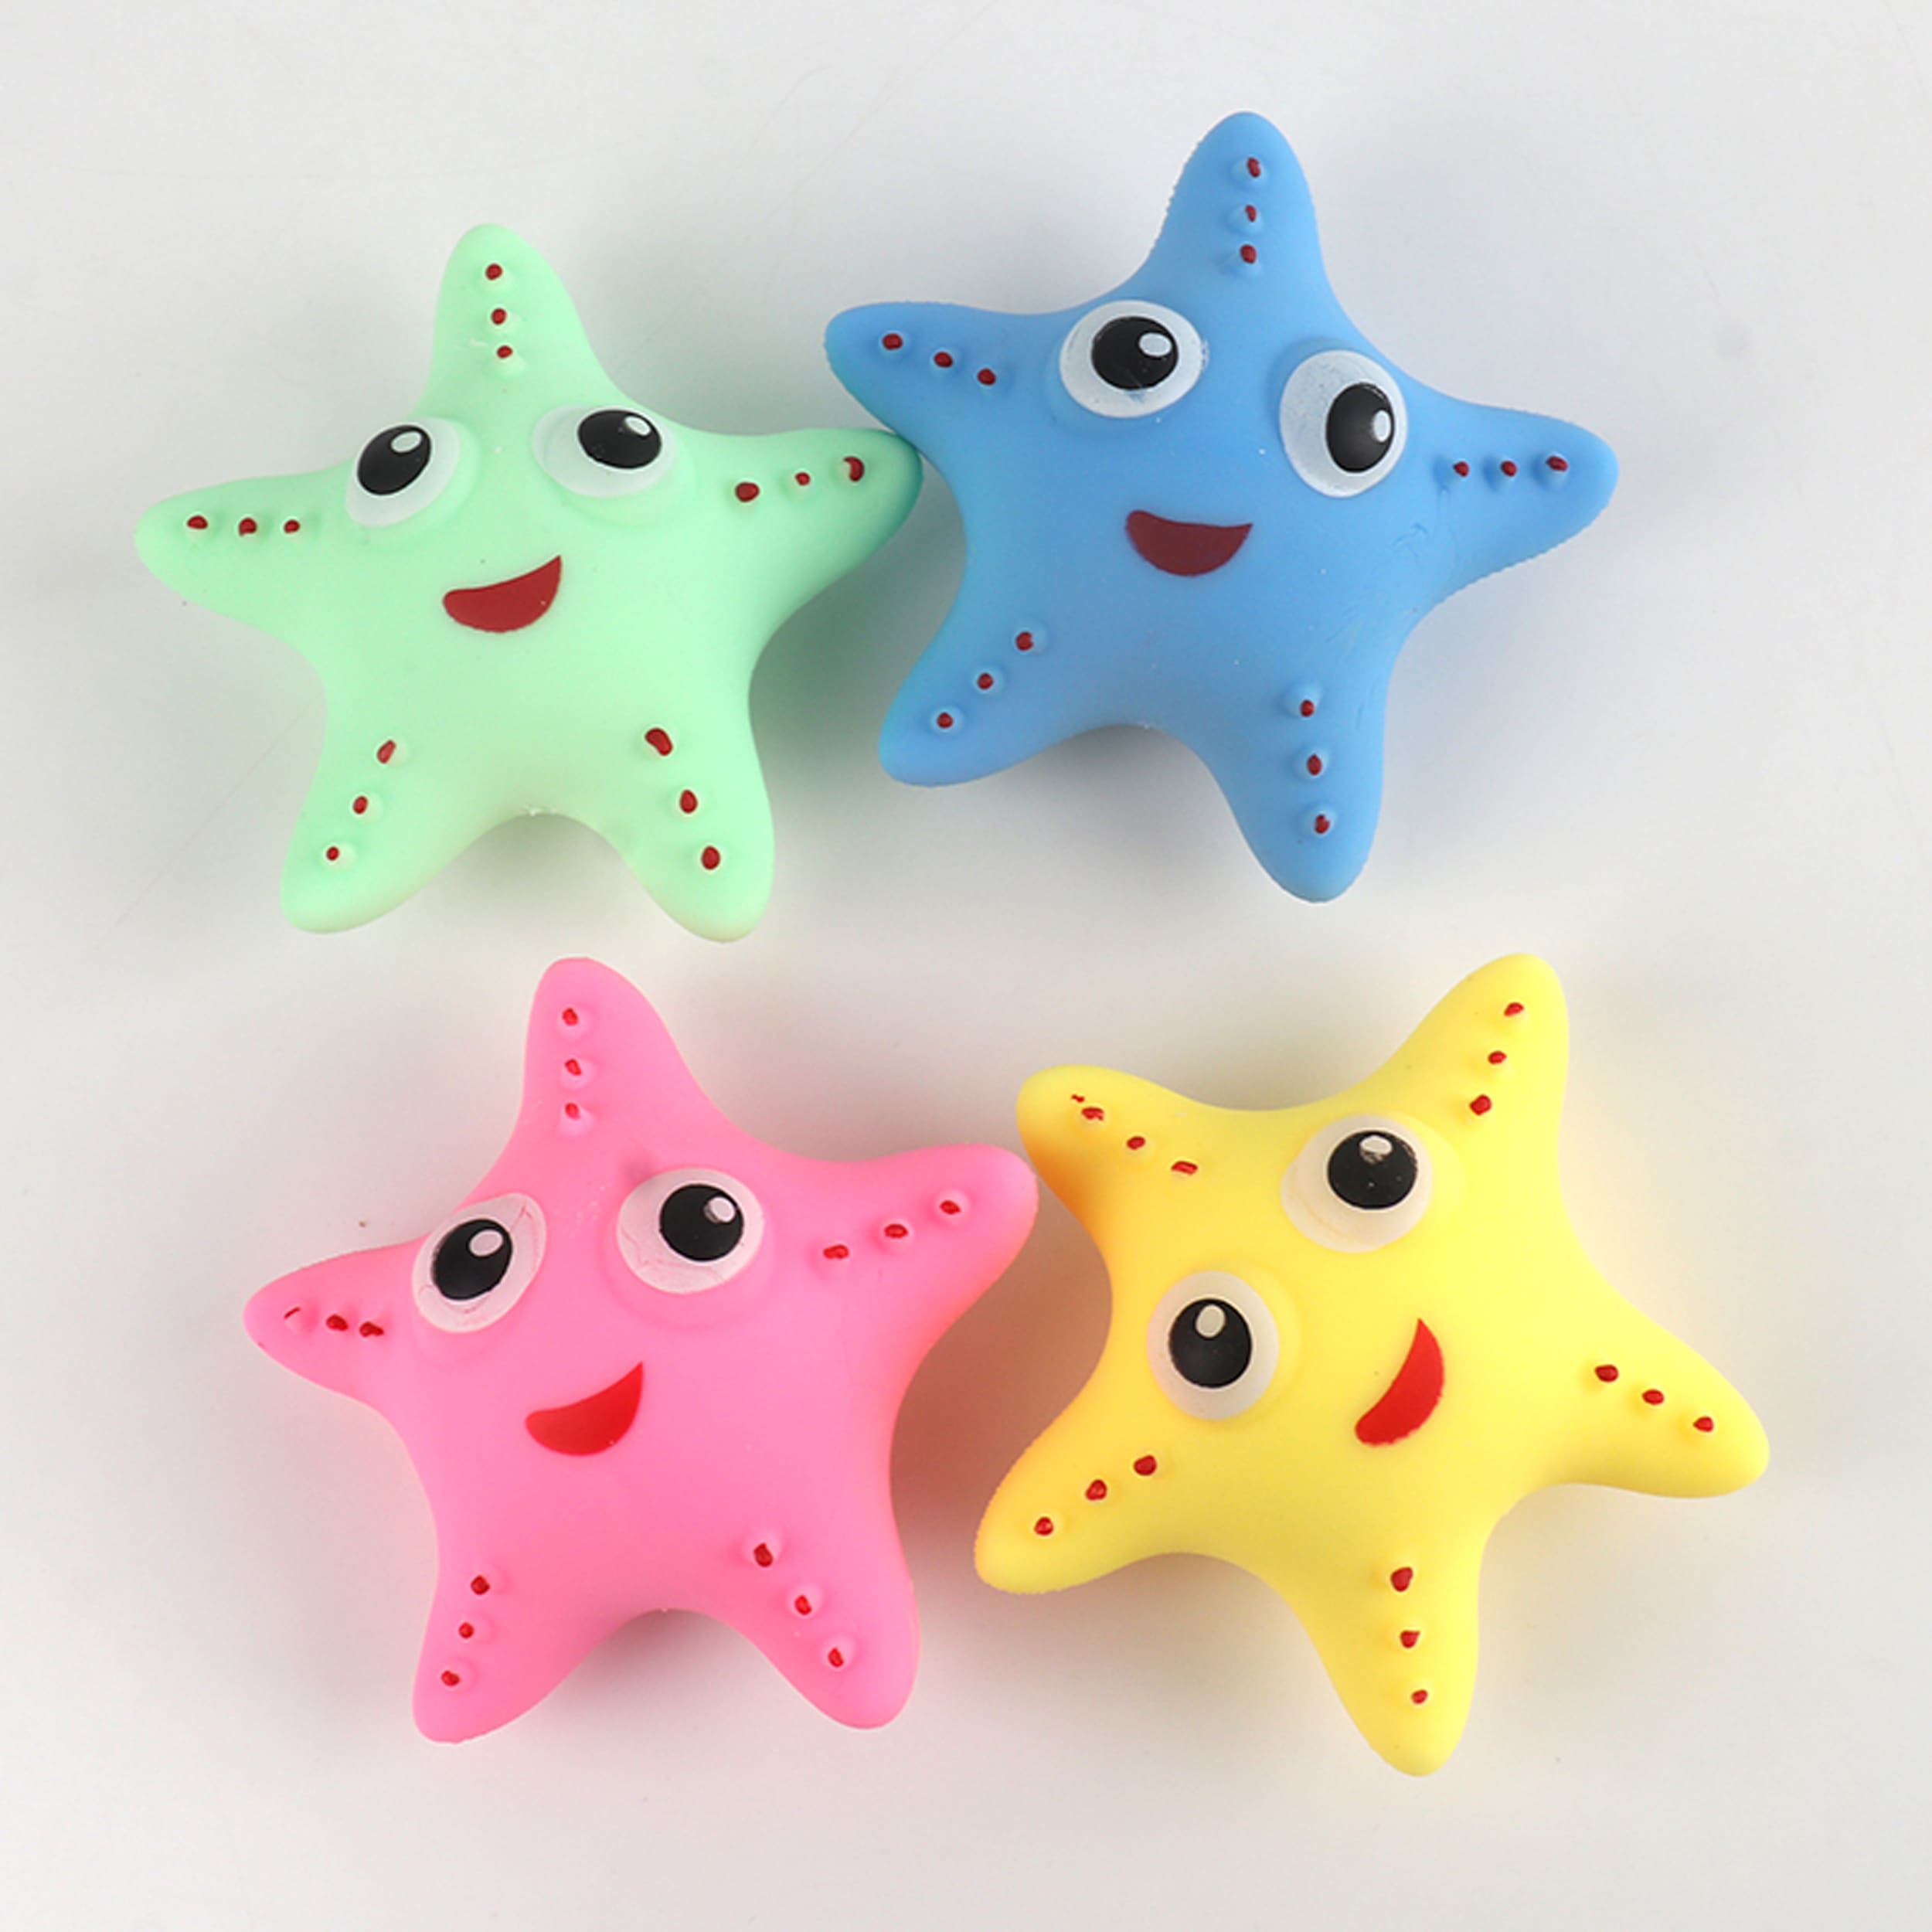 Twinkle, Twinkle with Star-Shaped Squishy Toys